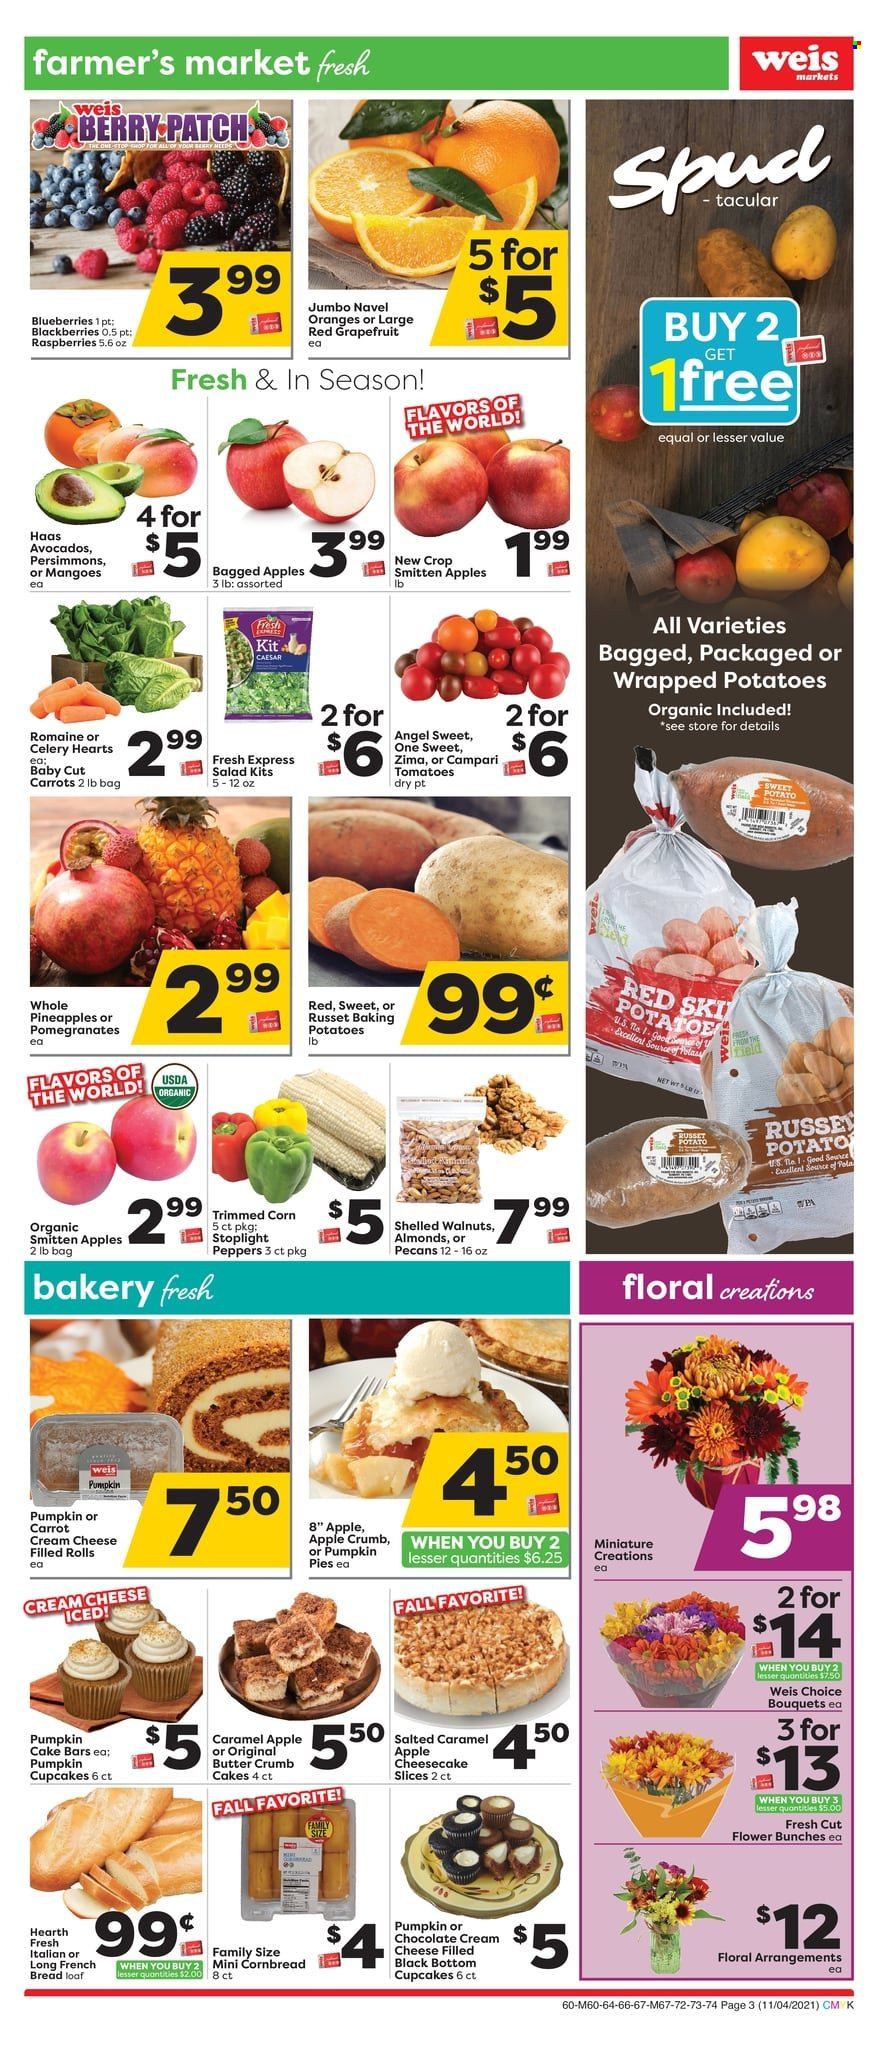 thumbnail - Weis Flyer - 11/04/2021 - 12/02/2021 - Sales products - persimmons, bread, cake, corn bread, french bread, cupcake, cheesecake, carrots, corn, russet potatoes, tomatoes, potatoes, pumpkin, salad, peppers, sleeved celery, apples, avocado, blackberries, blueberries, grapefruits, pineapple, oranges, cream cheese, cheese, butter, almonds, walnuts, pecans, bunches, bouquet, pomegranate, navel oranges. Page 3.